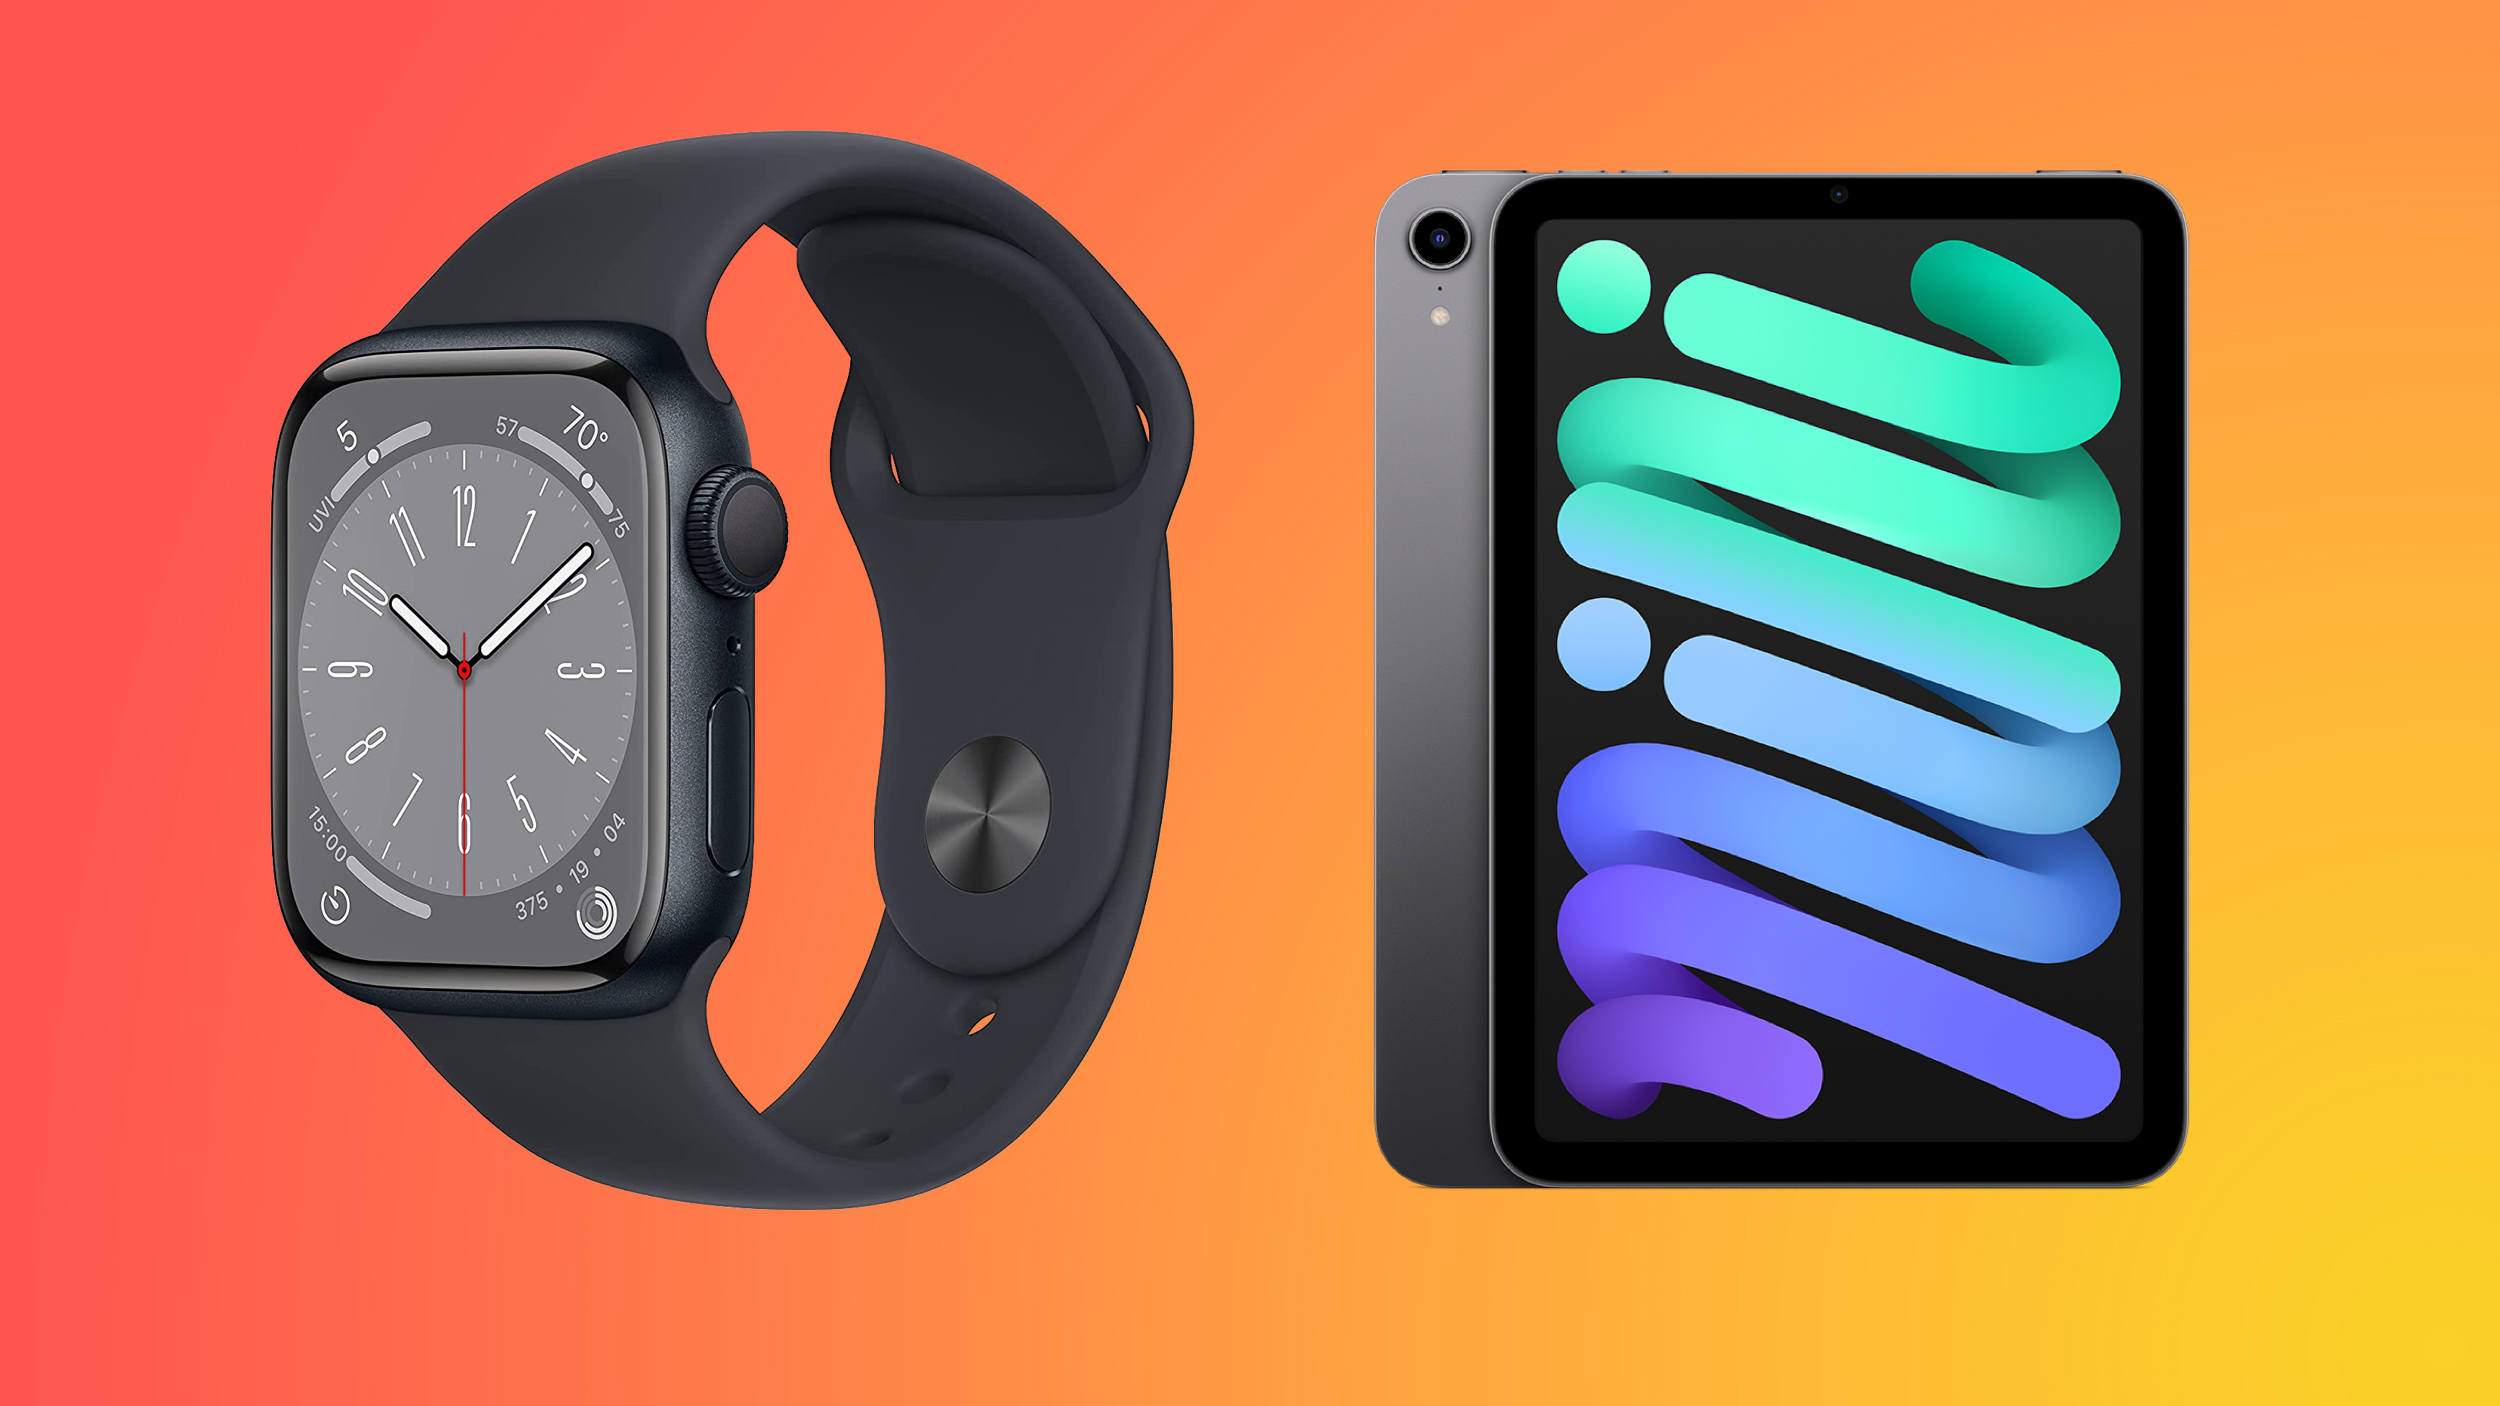 Missed Amazon Prime Early Access? You Can Still Get Apple Watch Series 8 and iPad Mini 6 for Record Low Prices Today